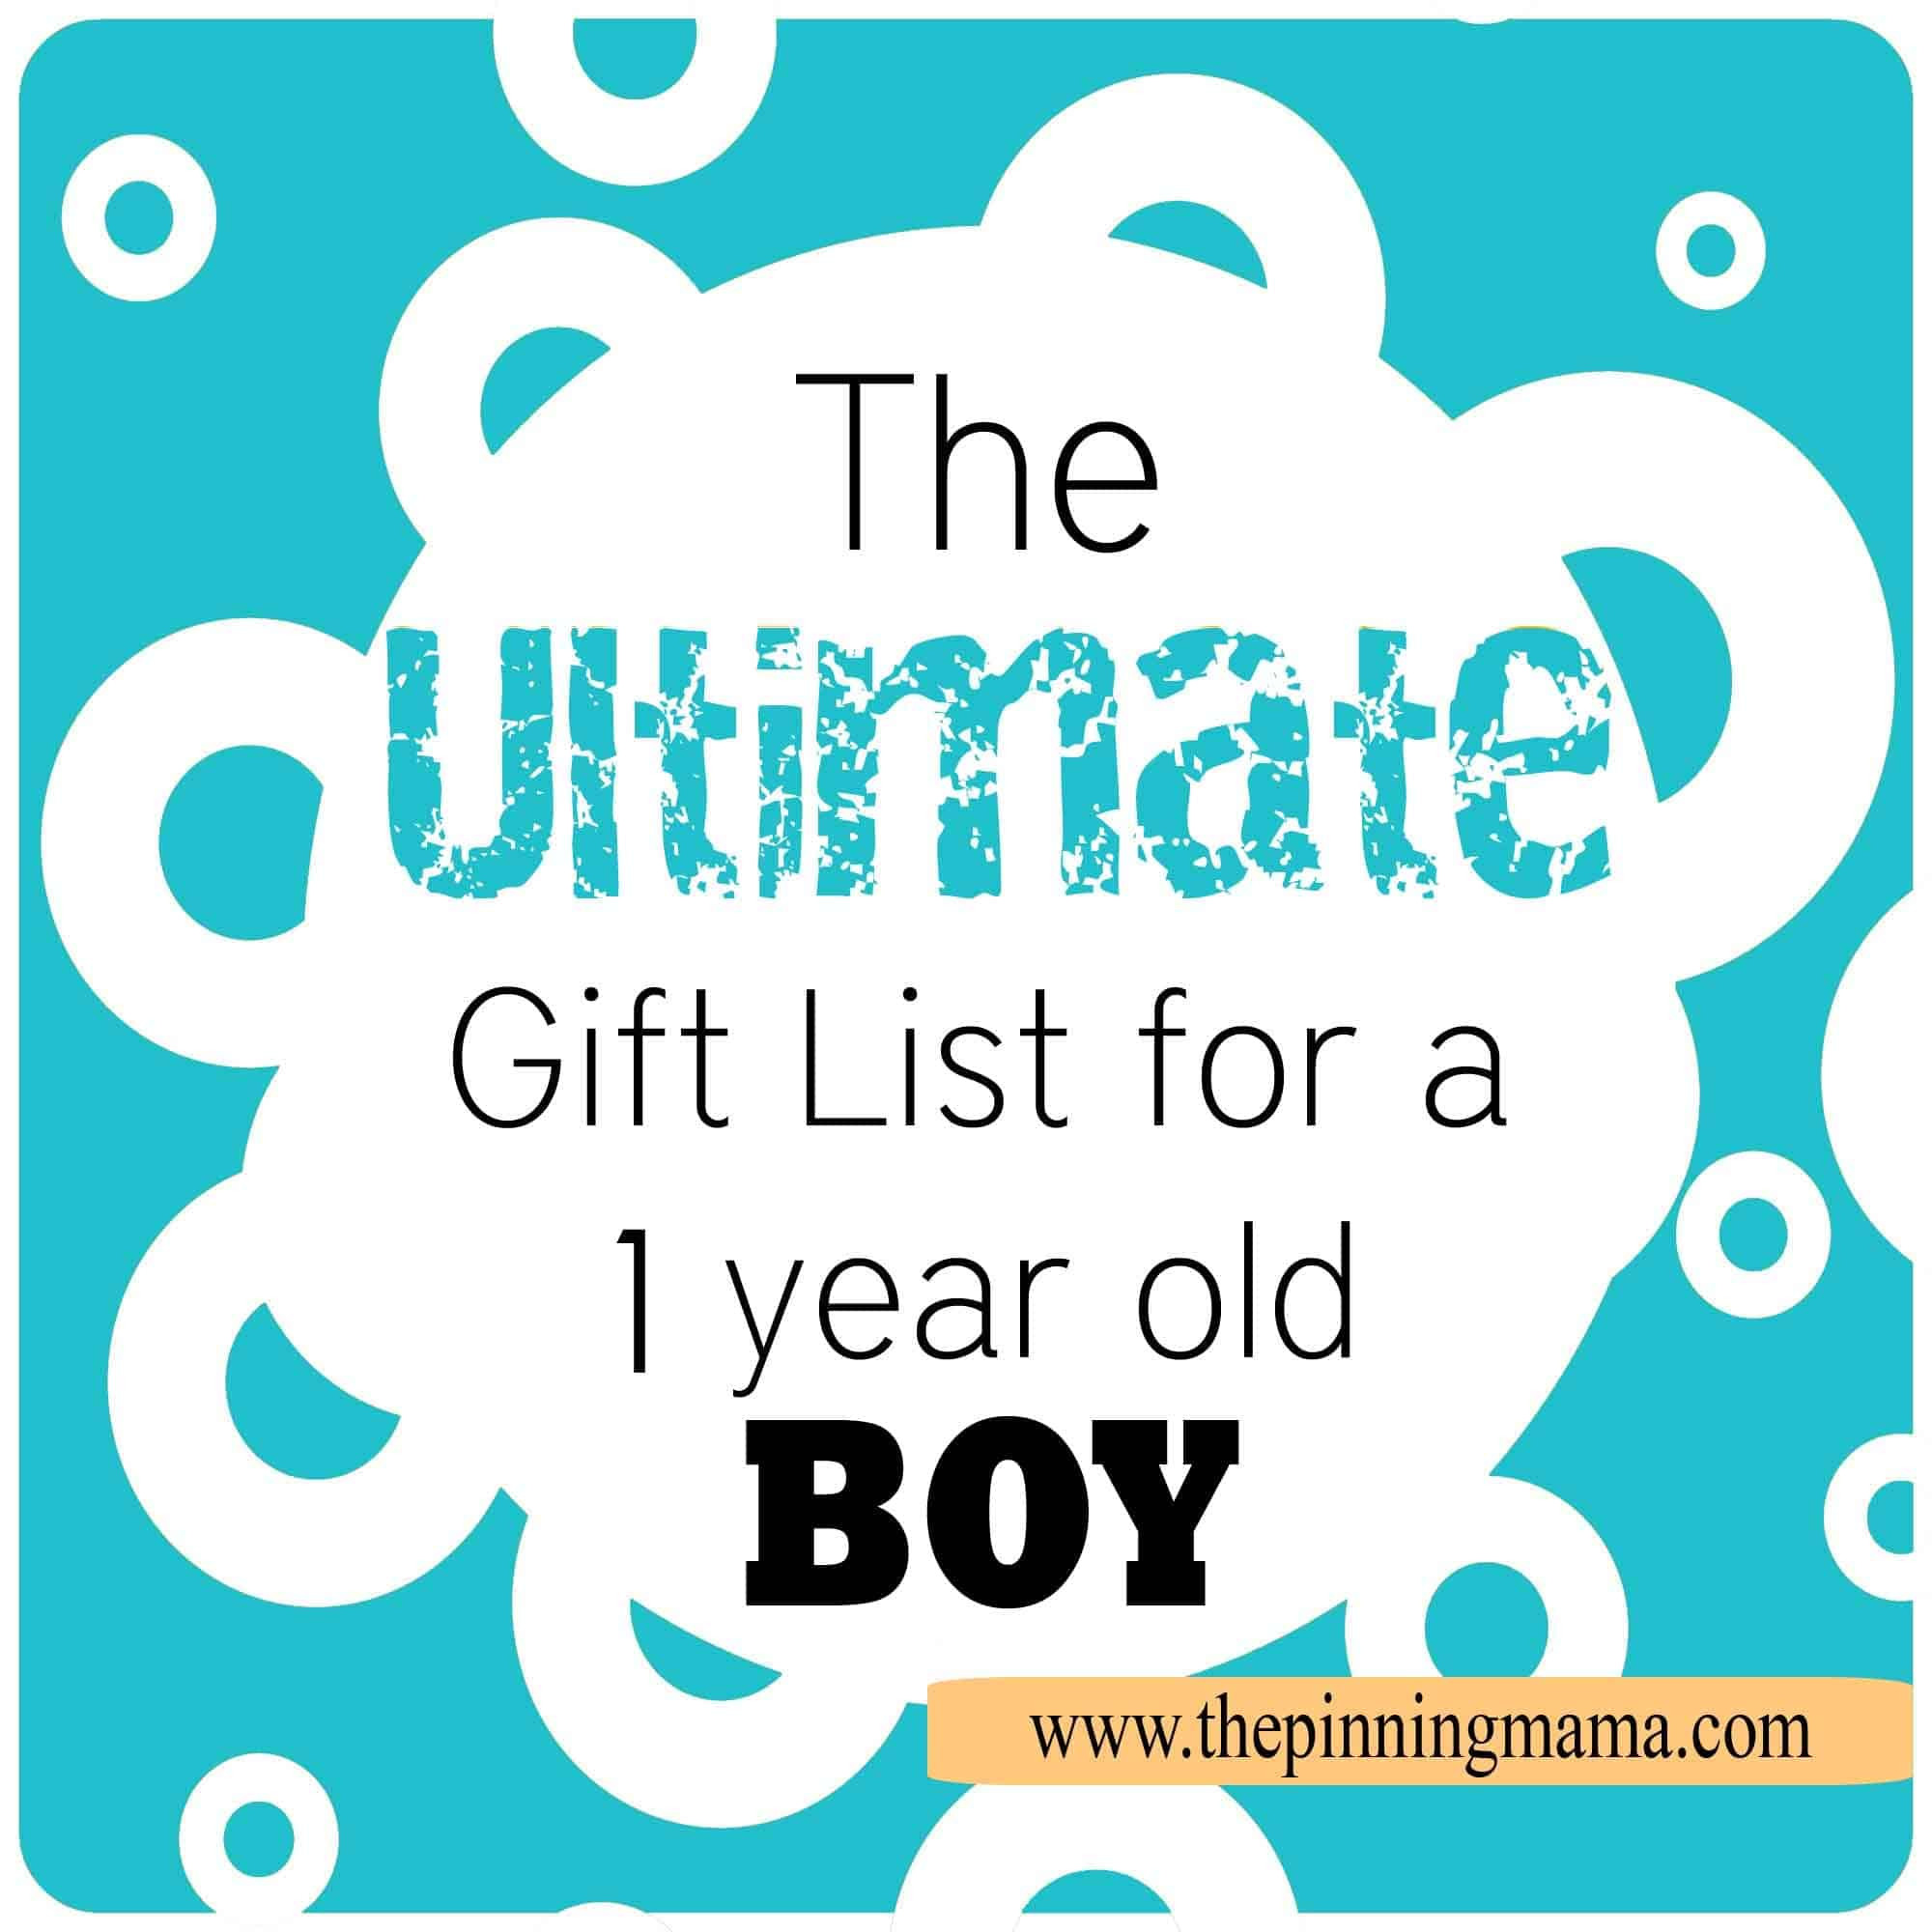 1 Year Old Baby Boy Birthday Gift Ideas
 The Ultimate Gift List for a 1 Year Old Boy by